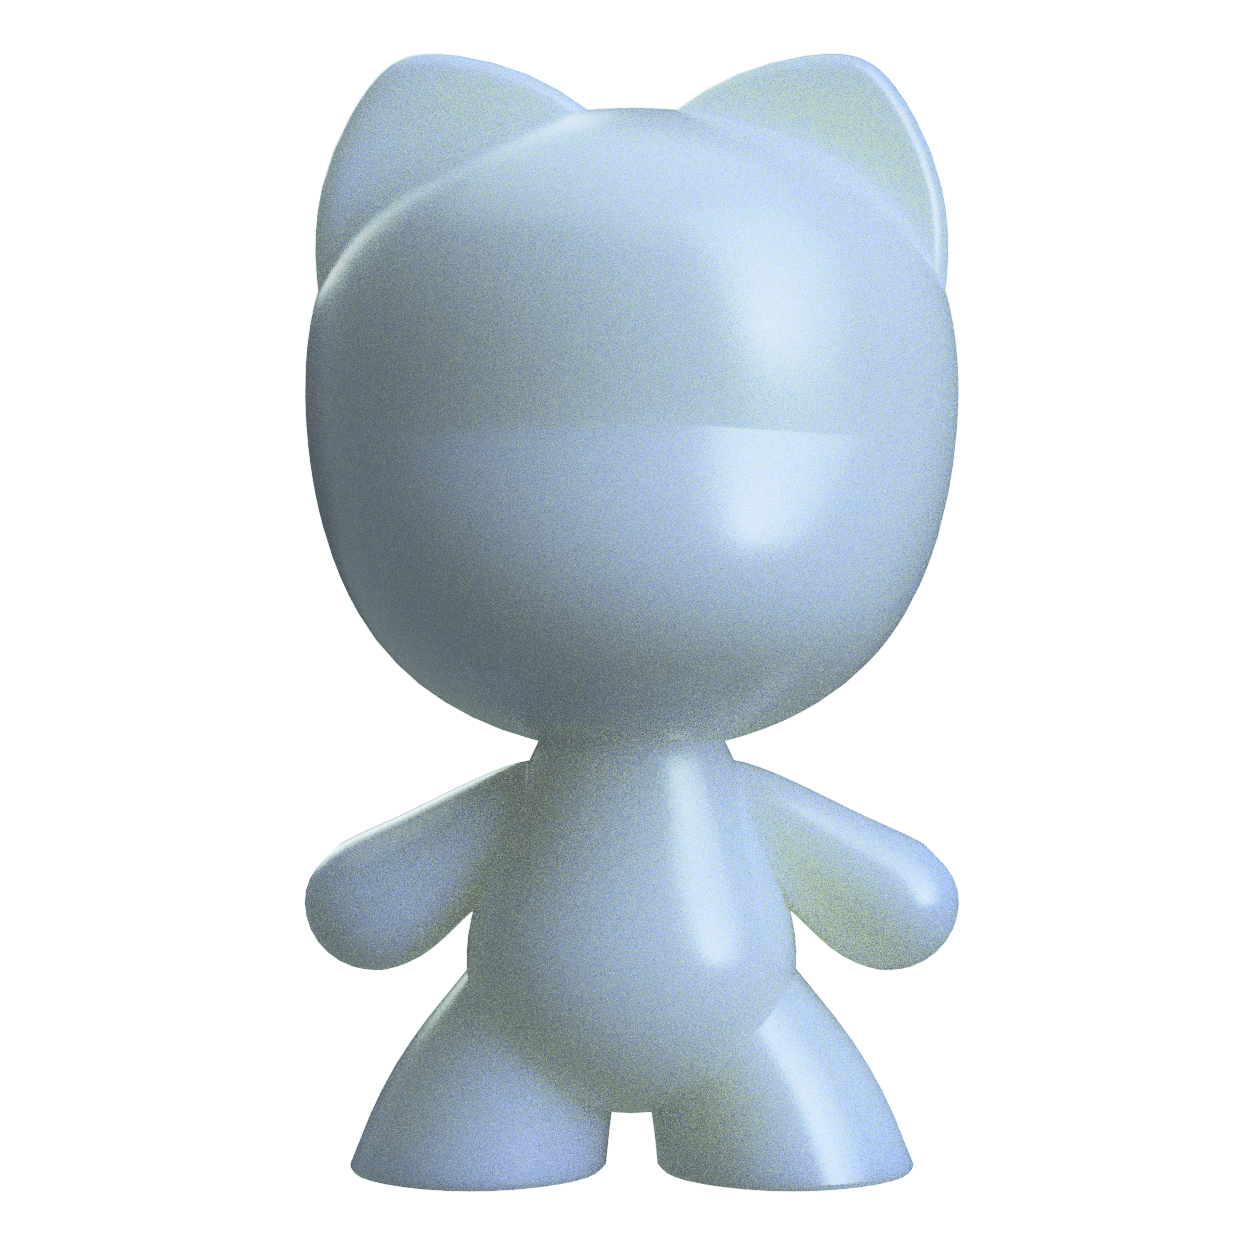 3D Printable Art Toy Figures Set - Bunny, Cat, Bear, Monkey, Human - For Commercial or Personal 3d model